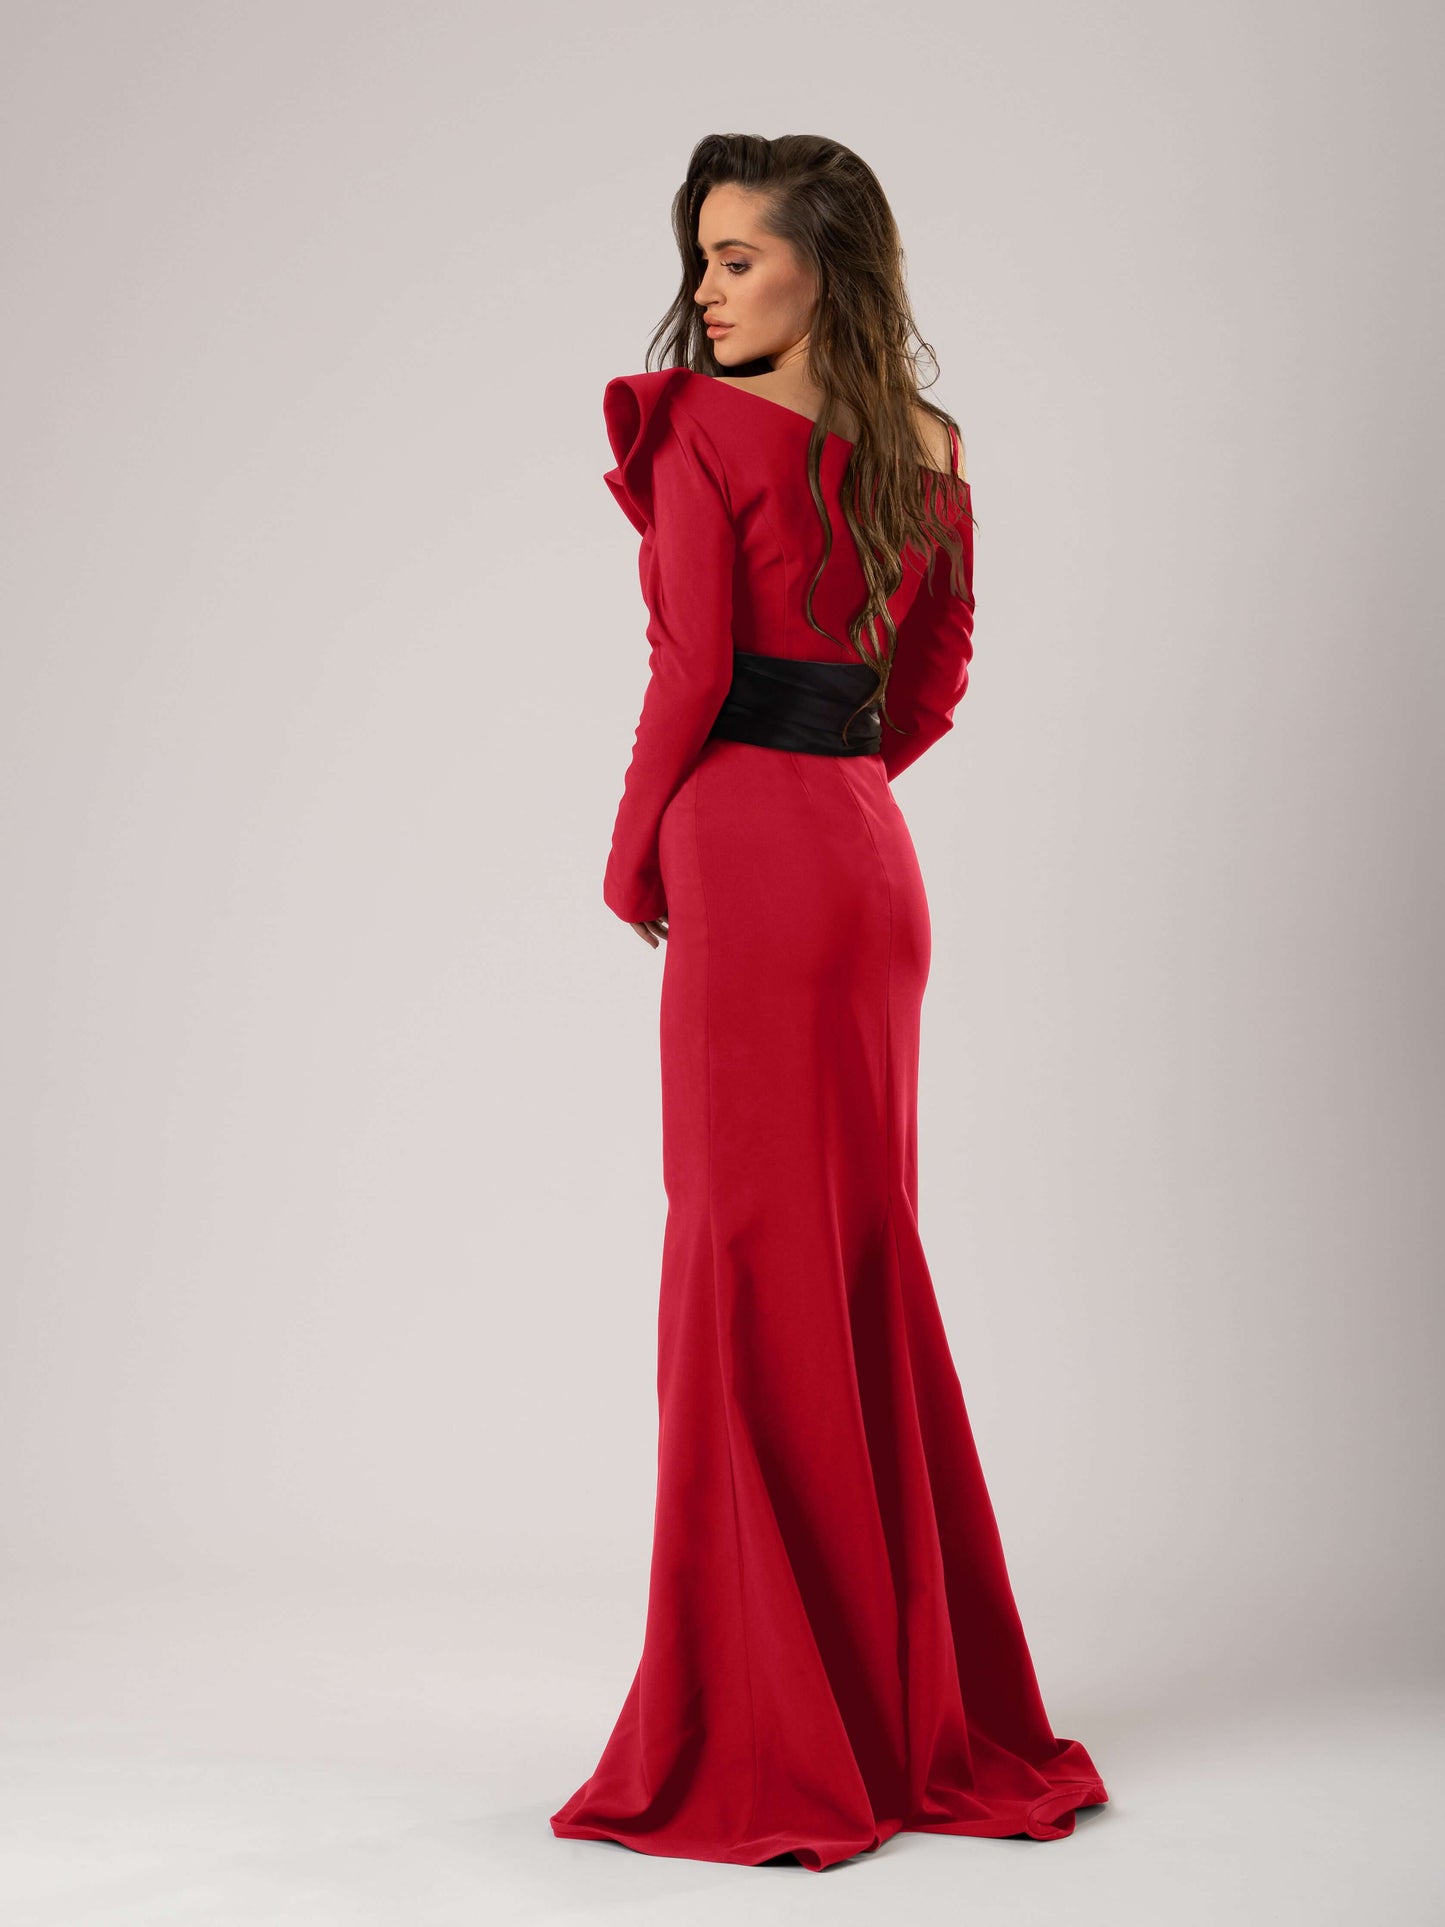 Magical Night Evening Dress with Satin Belt - Red & Black